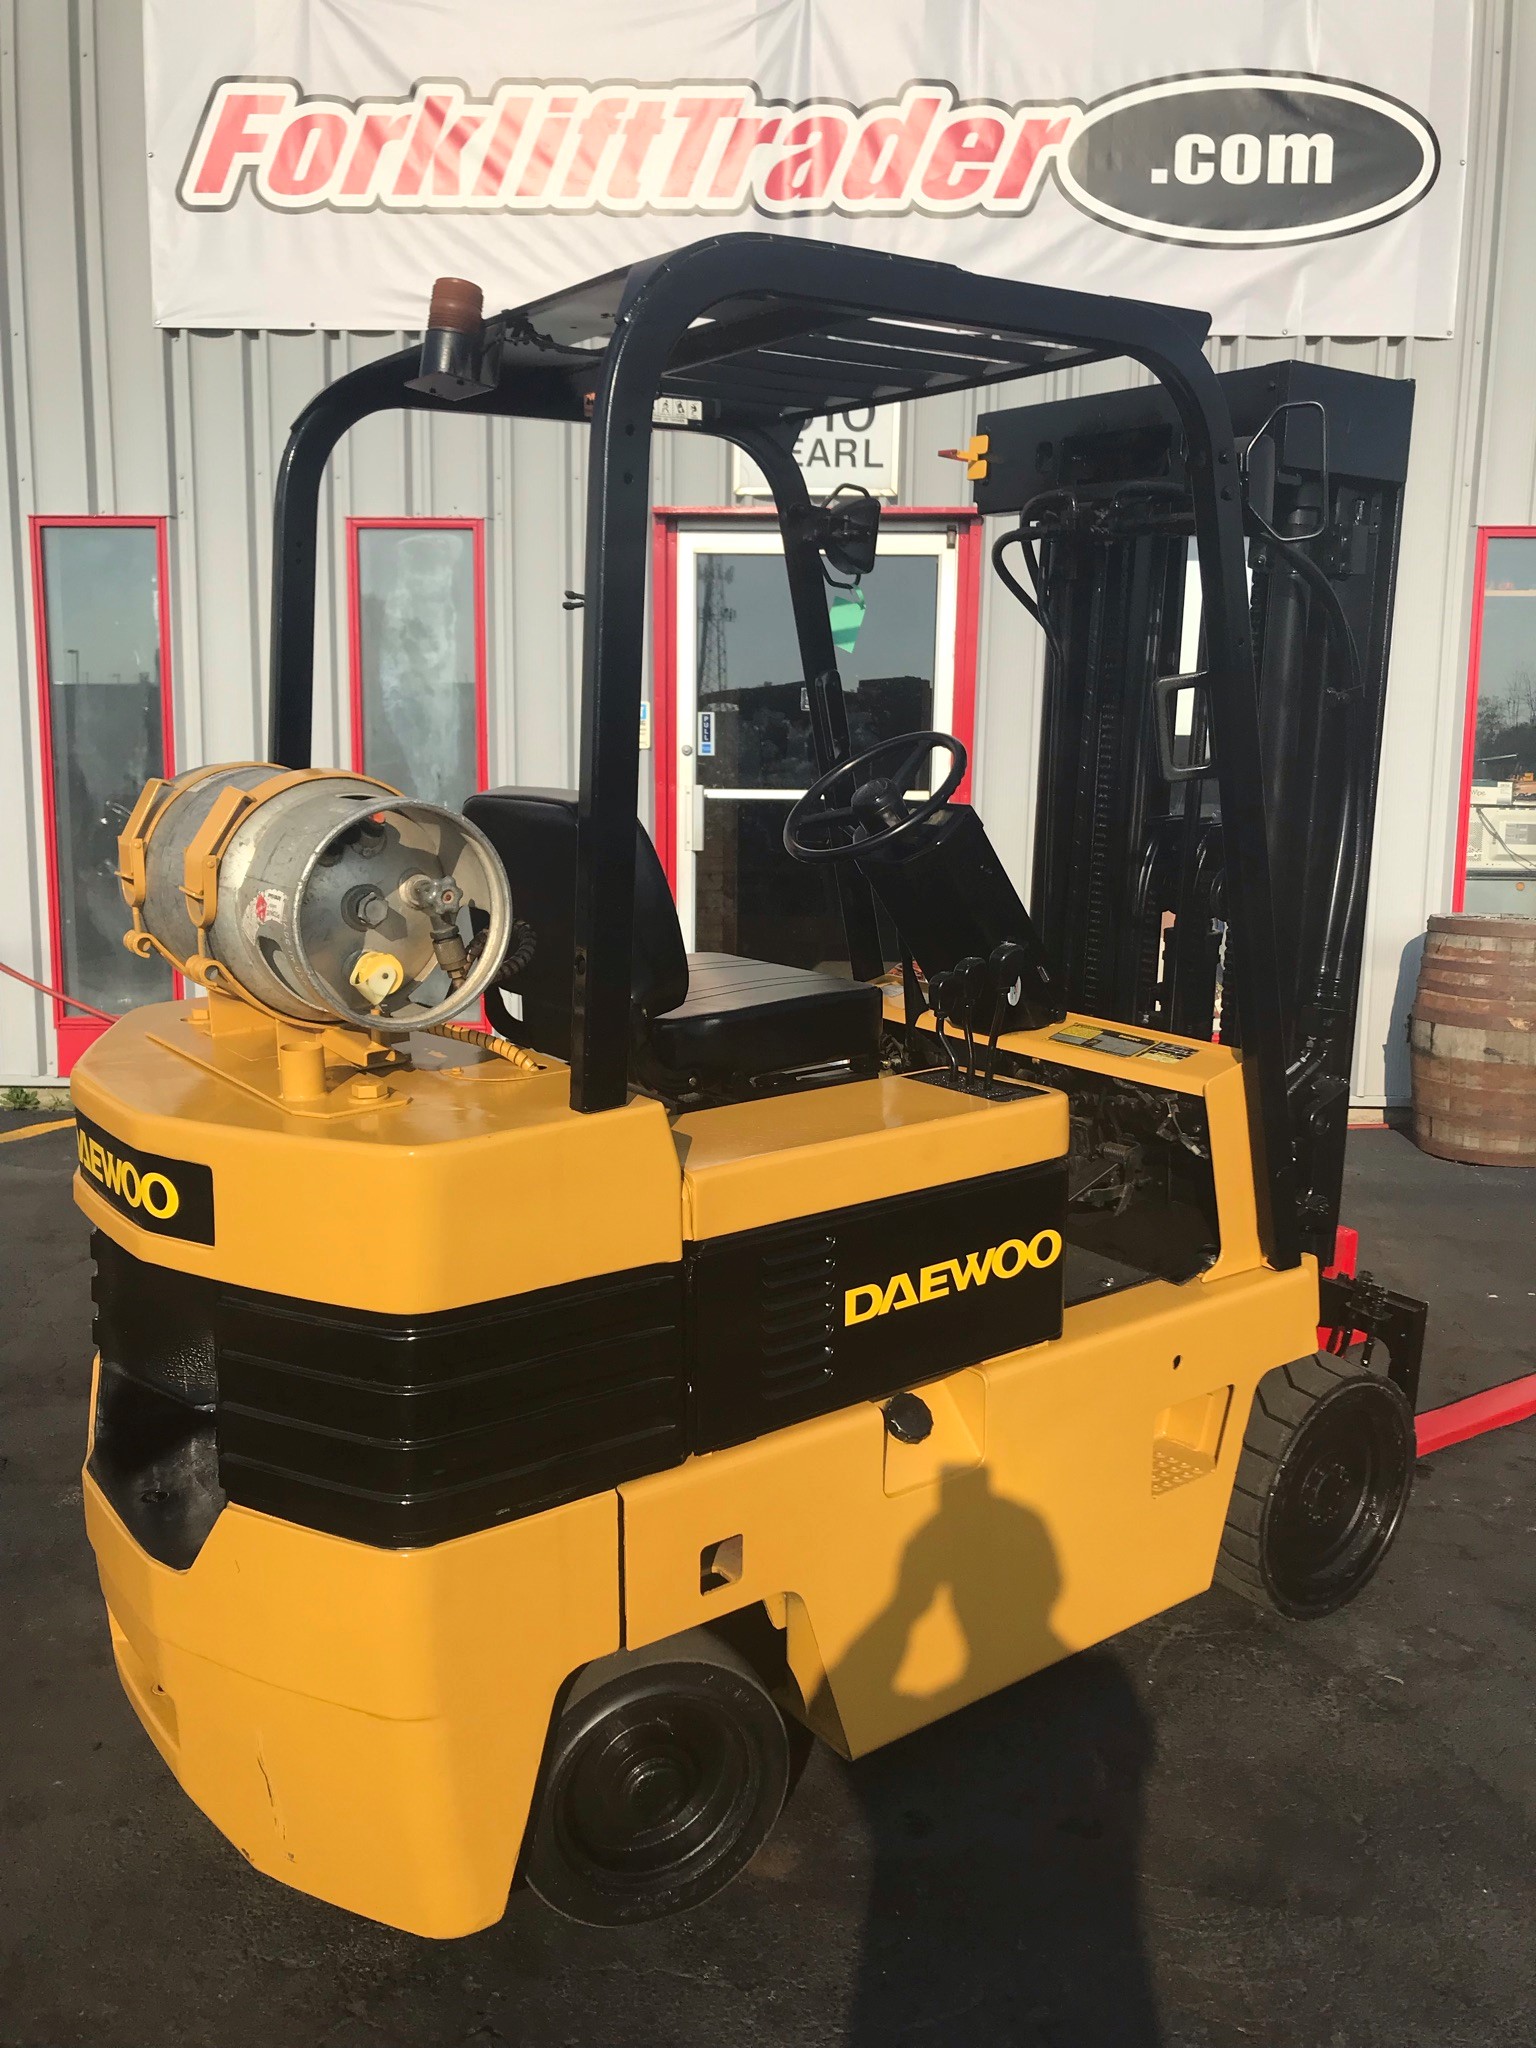 1998 yellow daewoo forklift with 6,000lb capacity